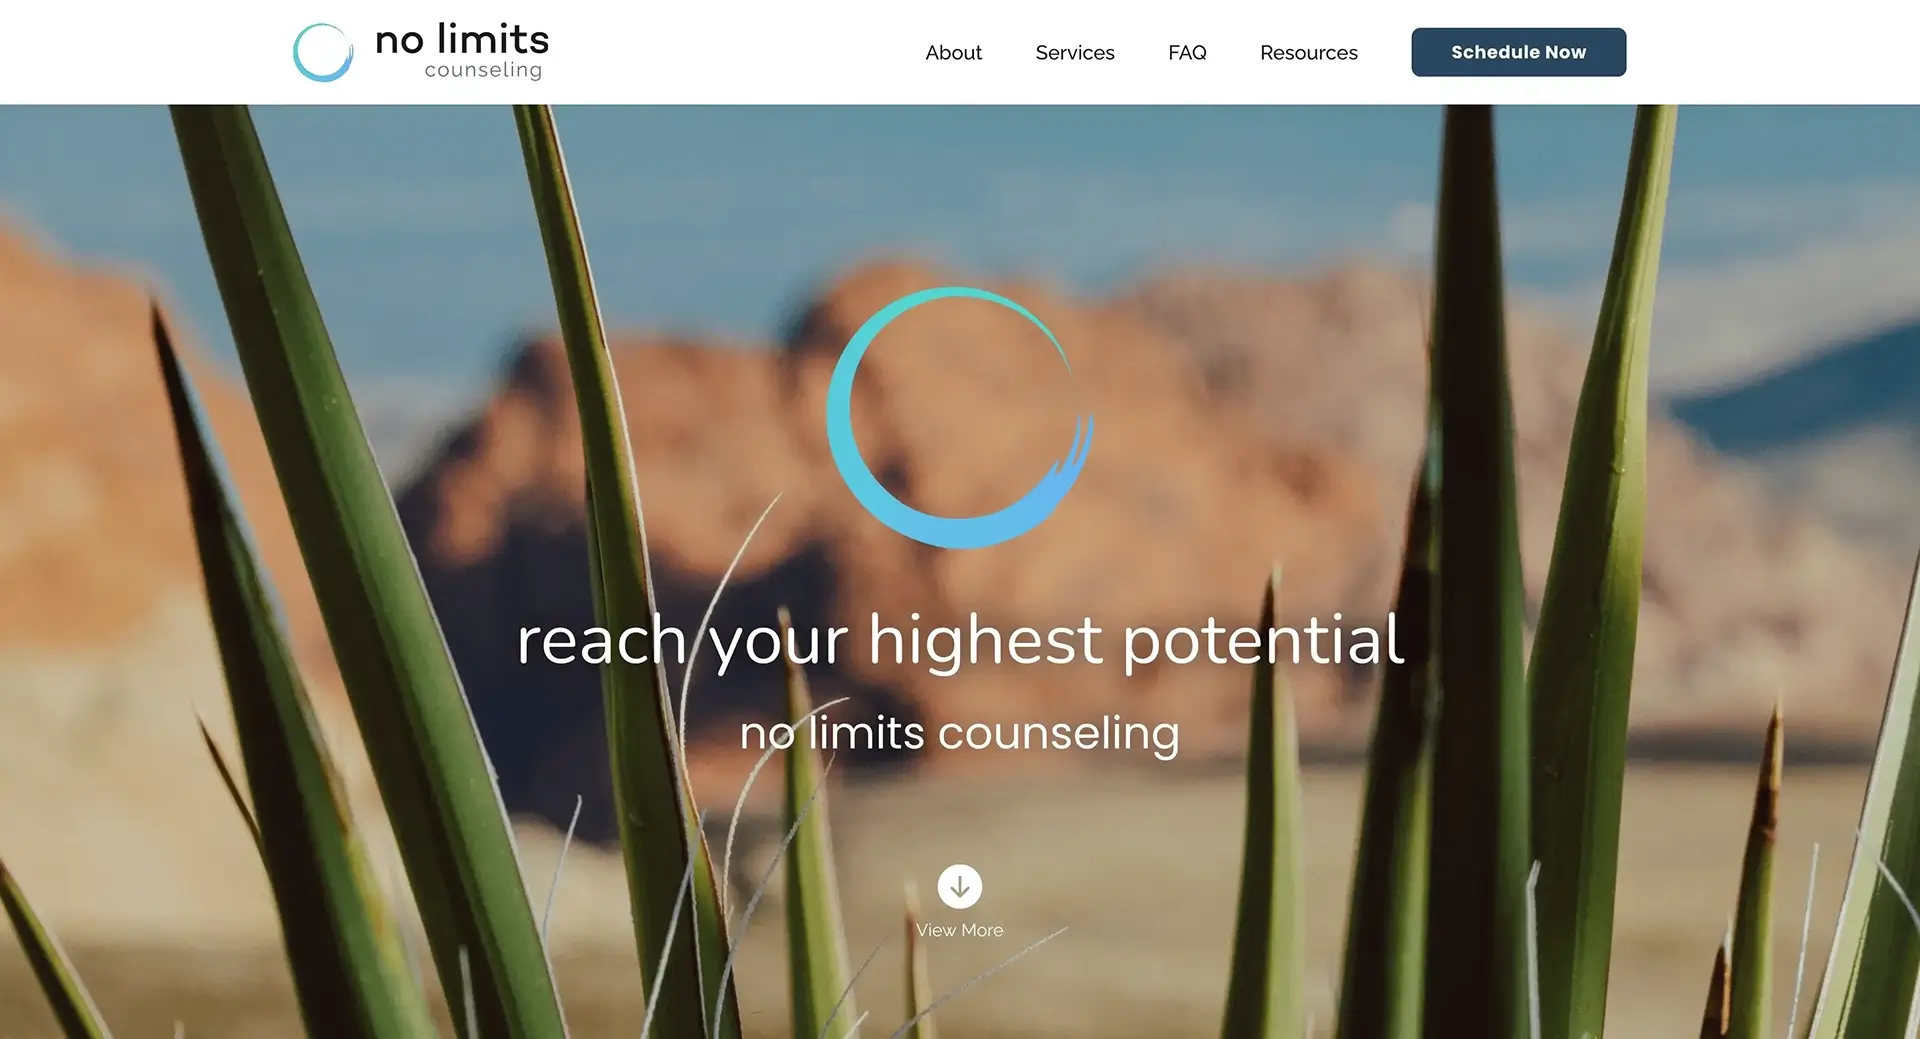 No Limits Counseling Marketing Site